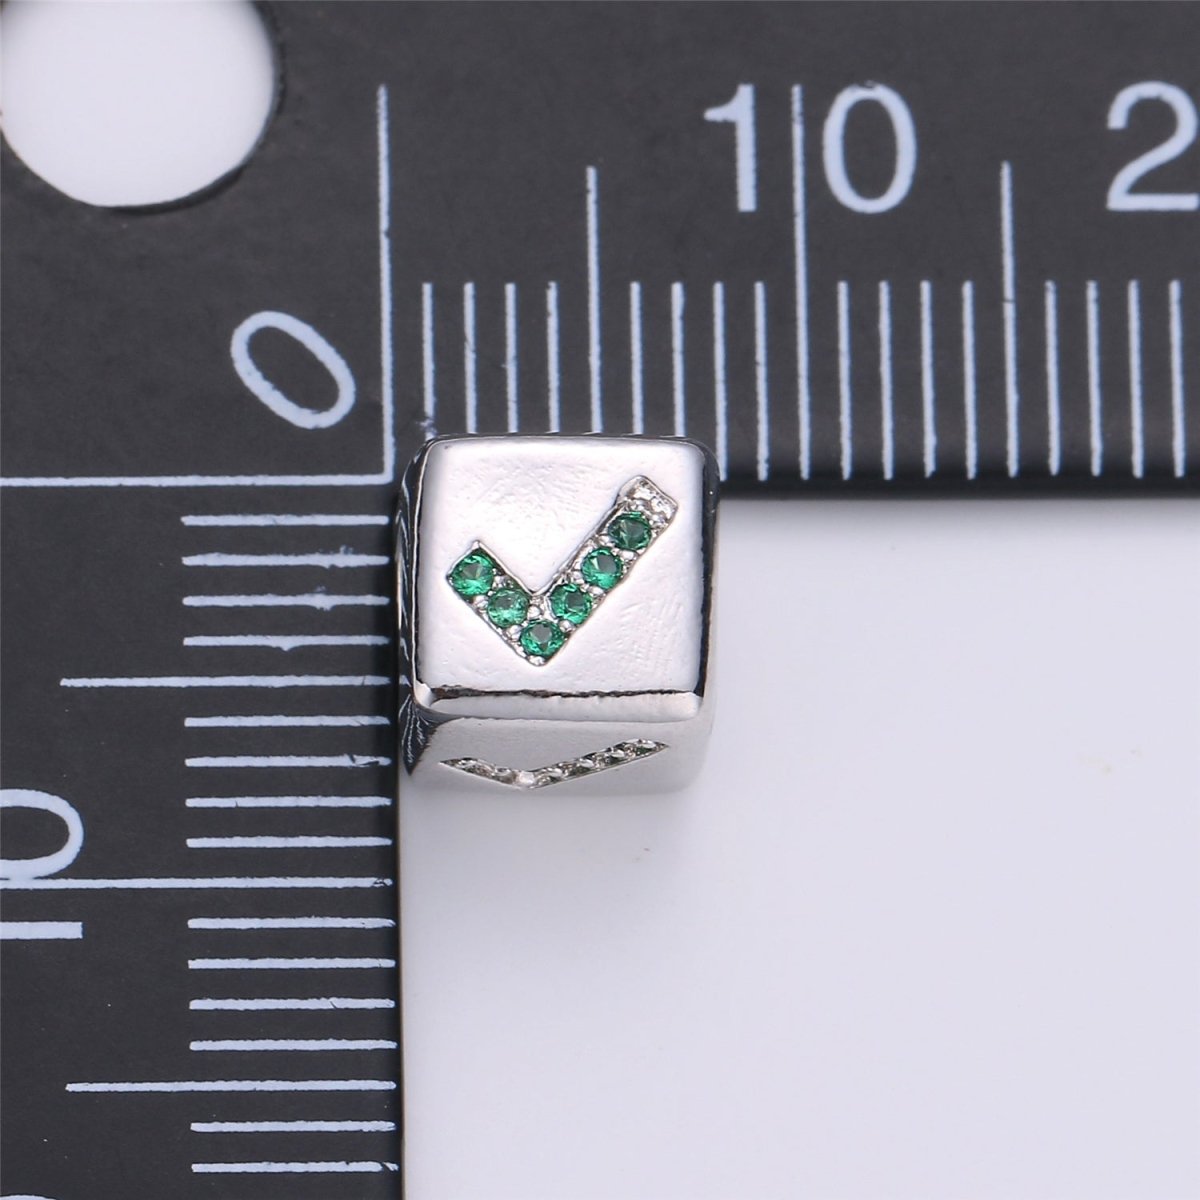 9x9mm CZ White Gold Filled Beads, hashtag # Beads, Heart Beads, Check Mark Beads, Star Block Charm for Making Bracelet Necklace Supply | B-241, B-242, B-243, B-244 - DLUXCA